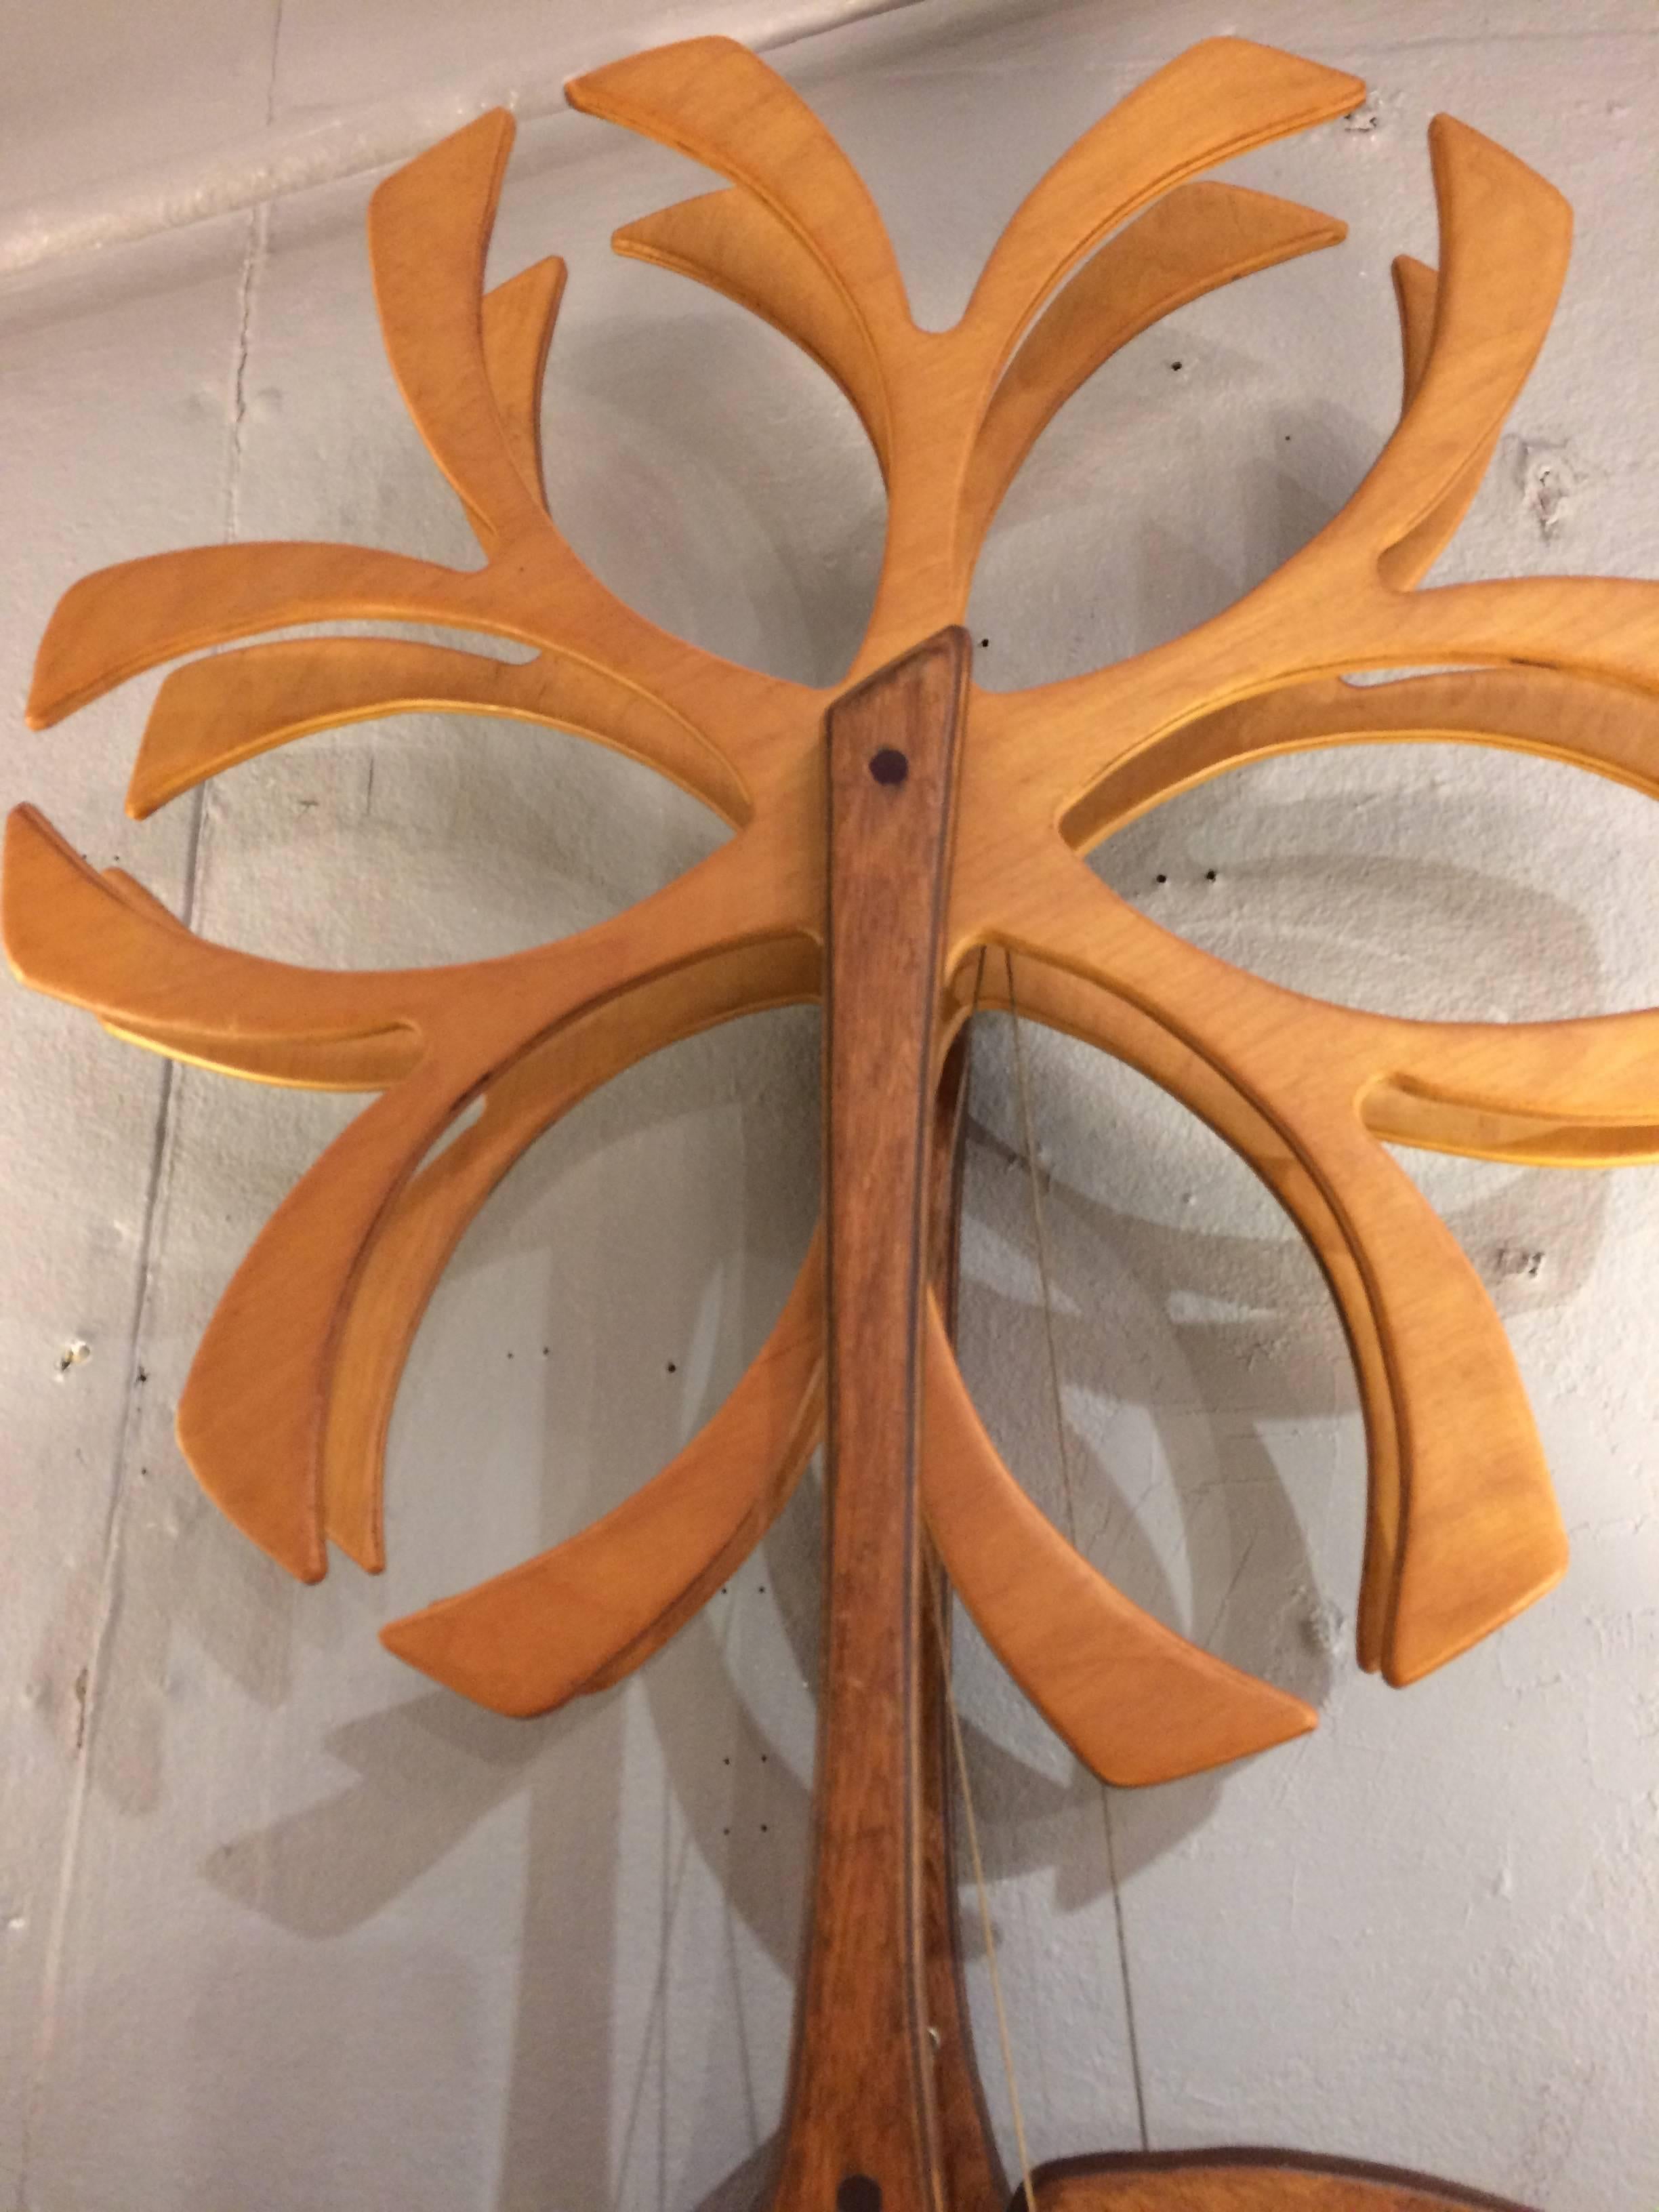 Eye-catching organic sculpture made from wood with central circular snowflake like mandala, connecting by string to other pieces that rotate, reminiscent of the inner workings of a clock. Two pulley like pieces are suspended by string 59 inches from